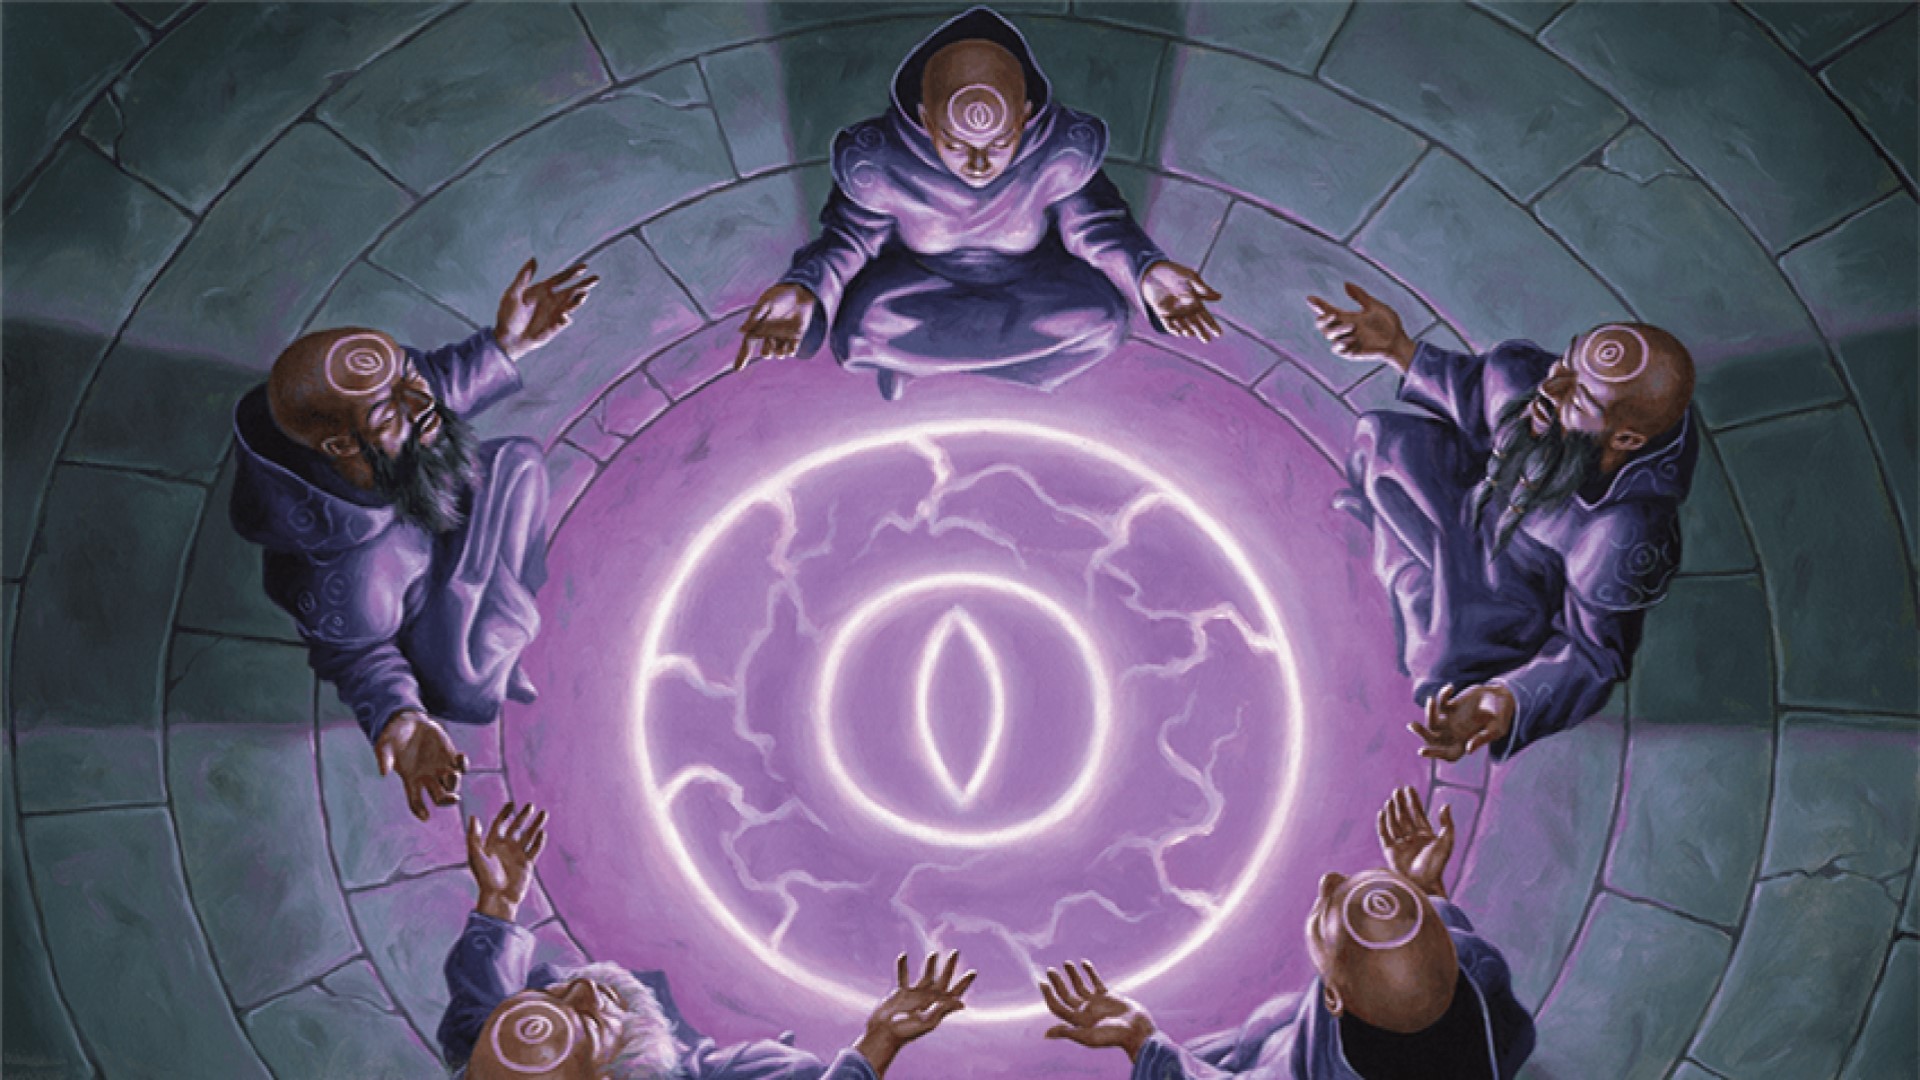 DnD Cleric 5E - Wizards of the Coast artwork showing several bald mages conducting a magical ritual, with a glowing blue sigil on the ground between them